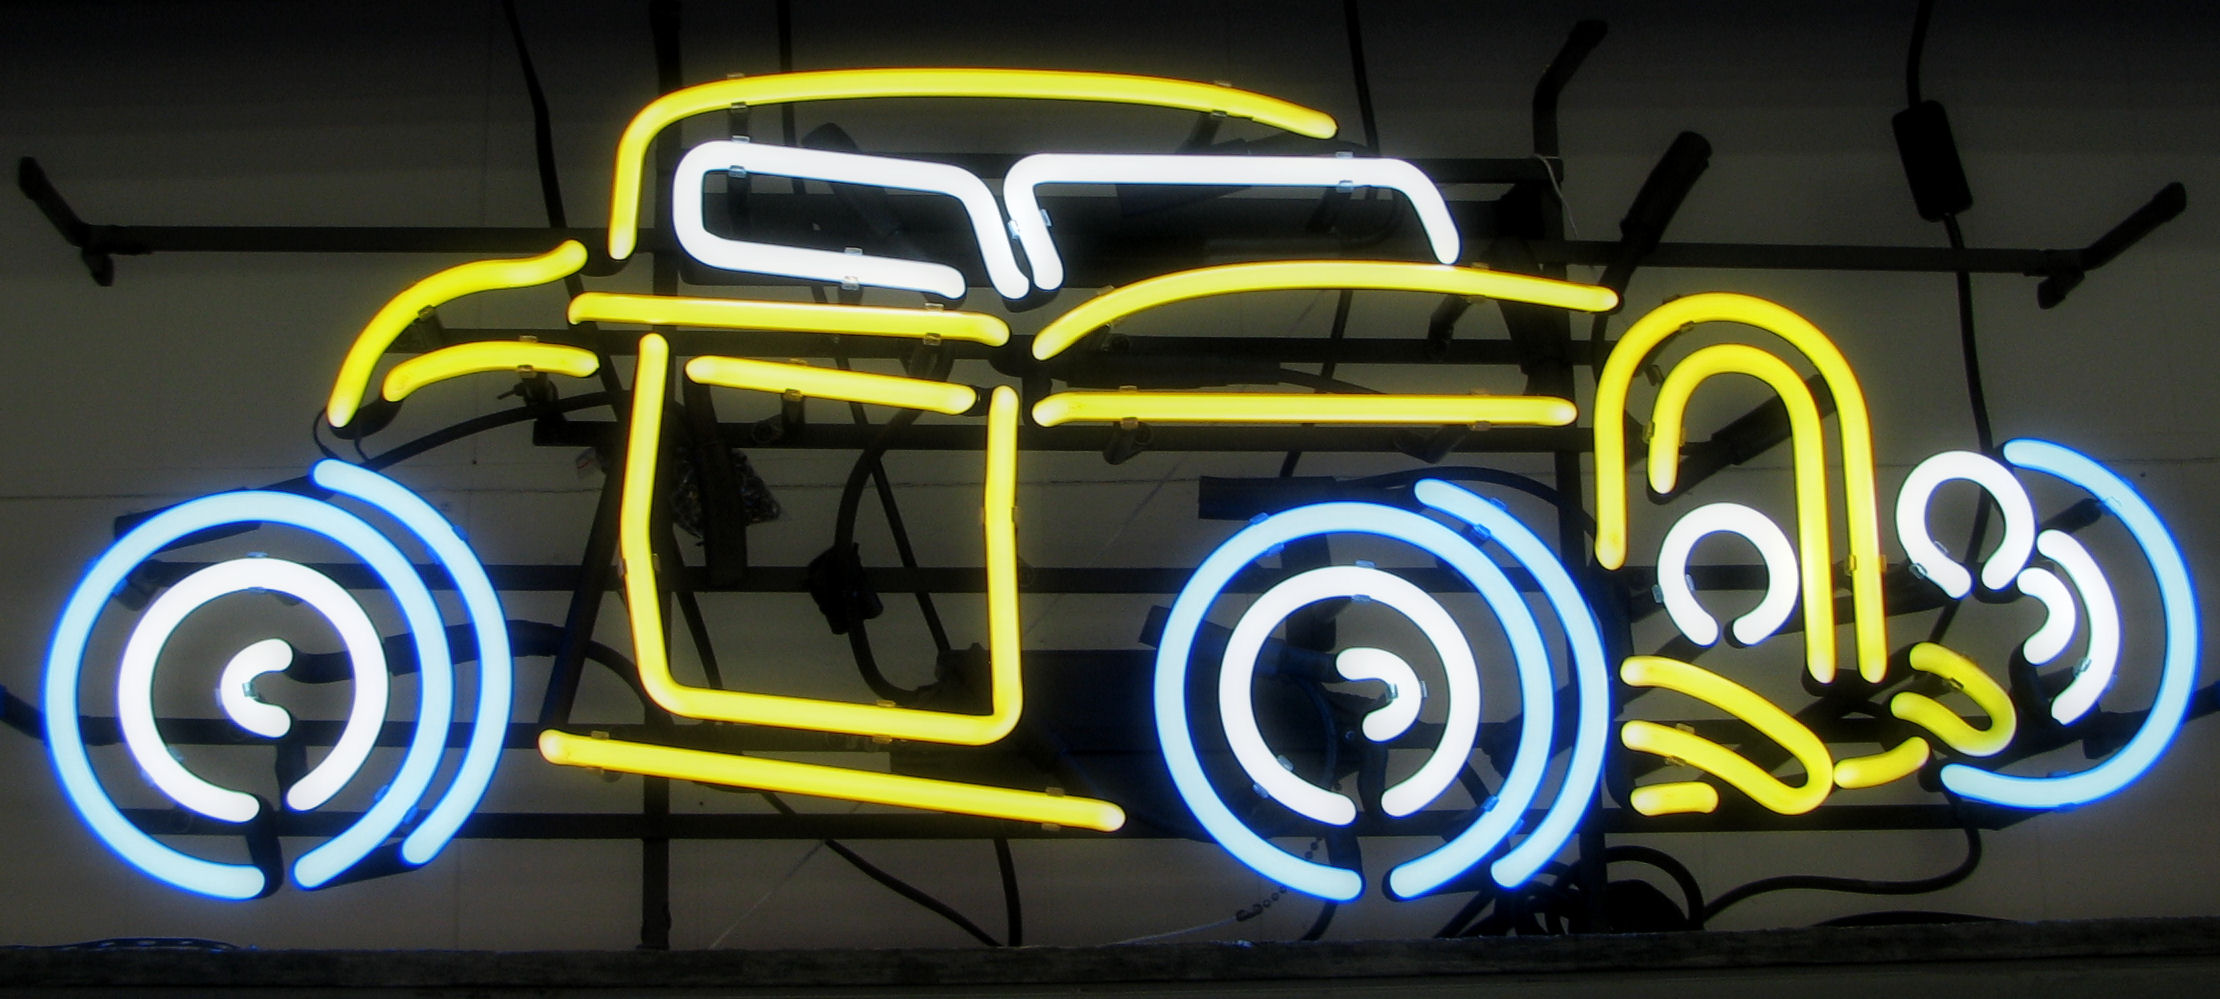 Car Classic Car Neon Neon Sign Sign Vehicle 2220x999